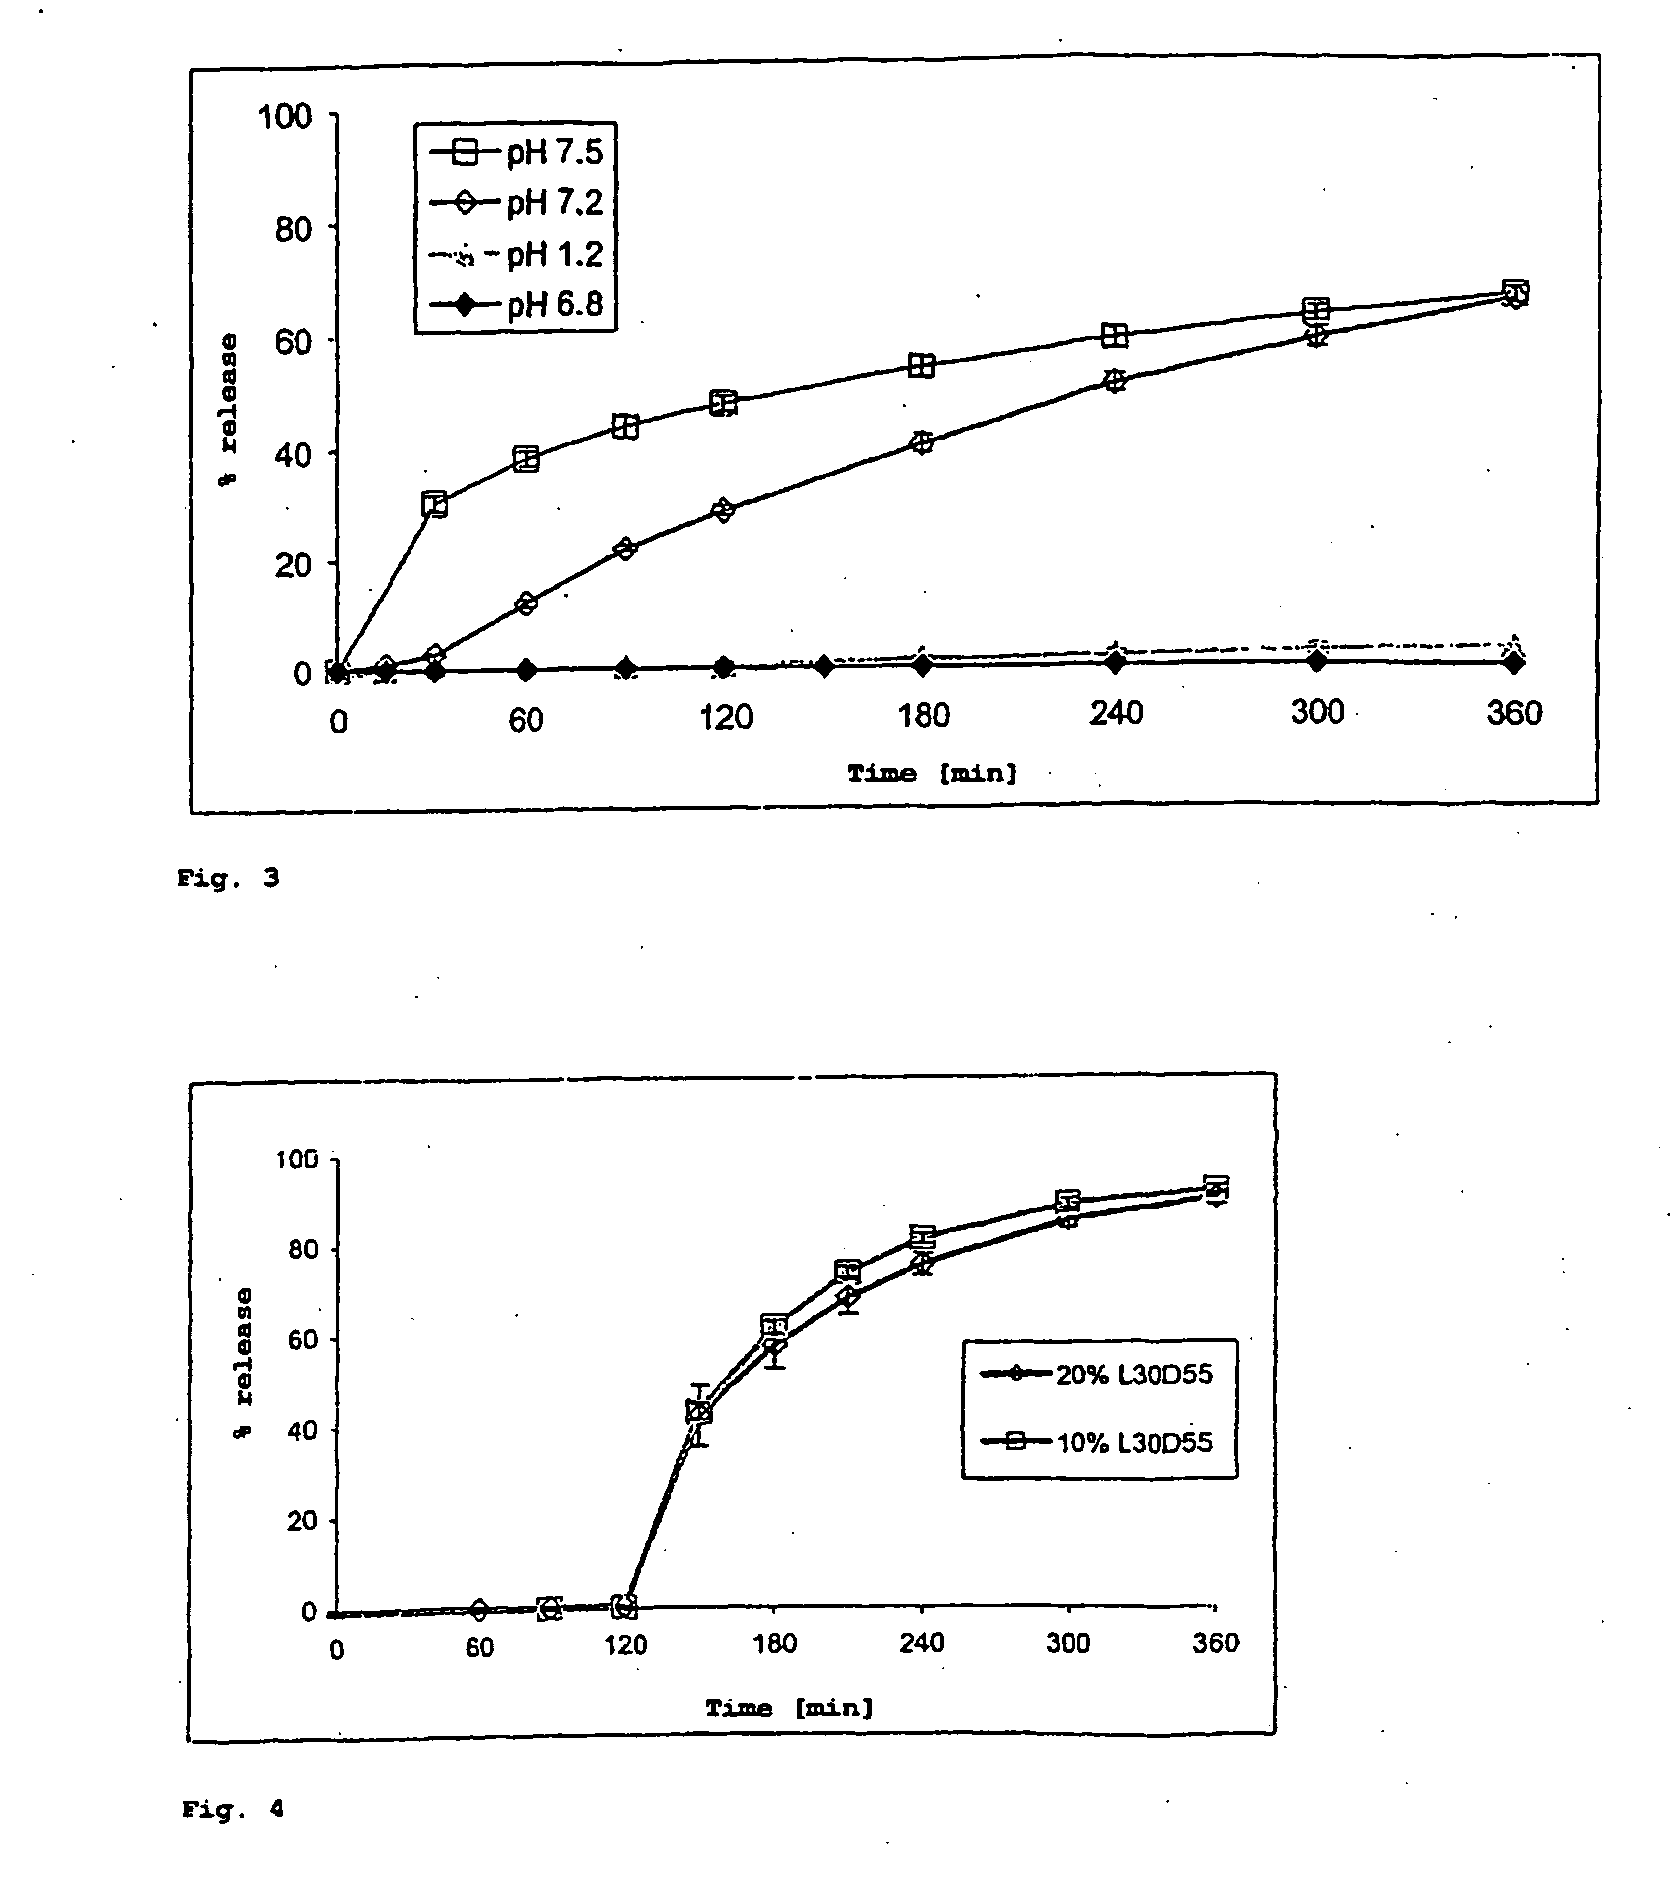 Multilayer dosage forms, which contain active substances and which comprise a neutral core, and an inner and outer coating consisting of methacrylate copolymers and methacrylate monomers